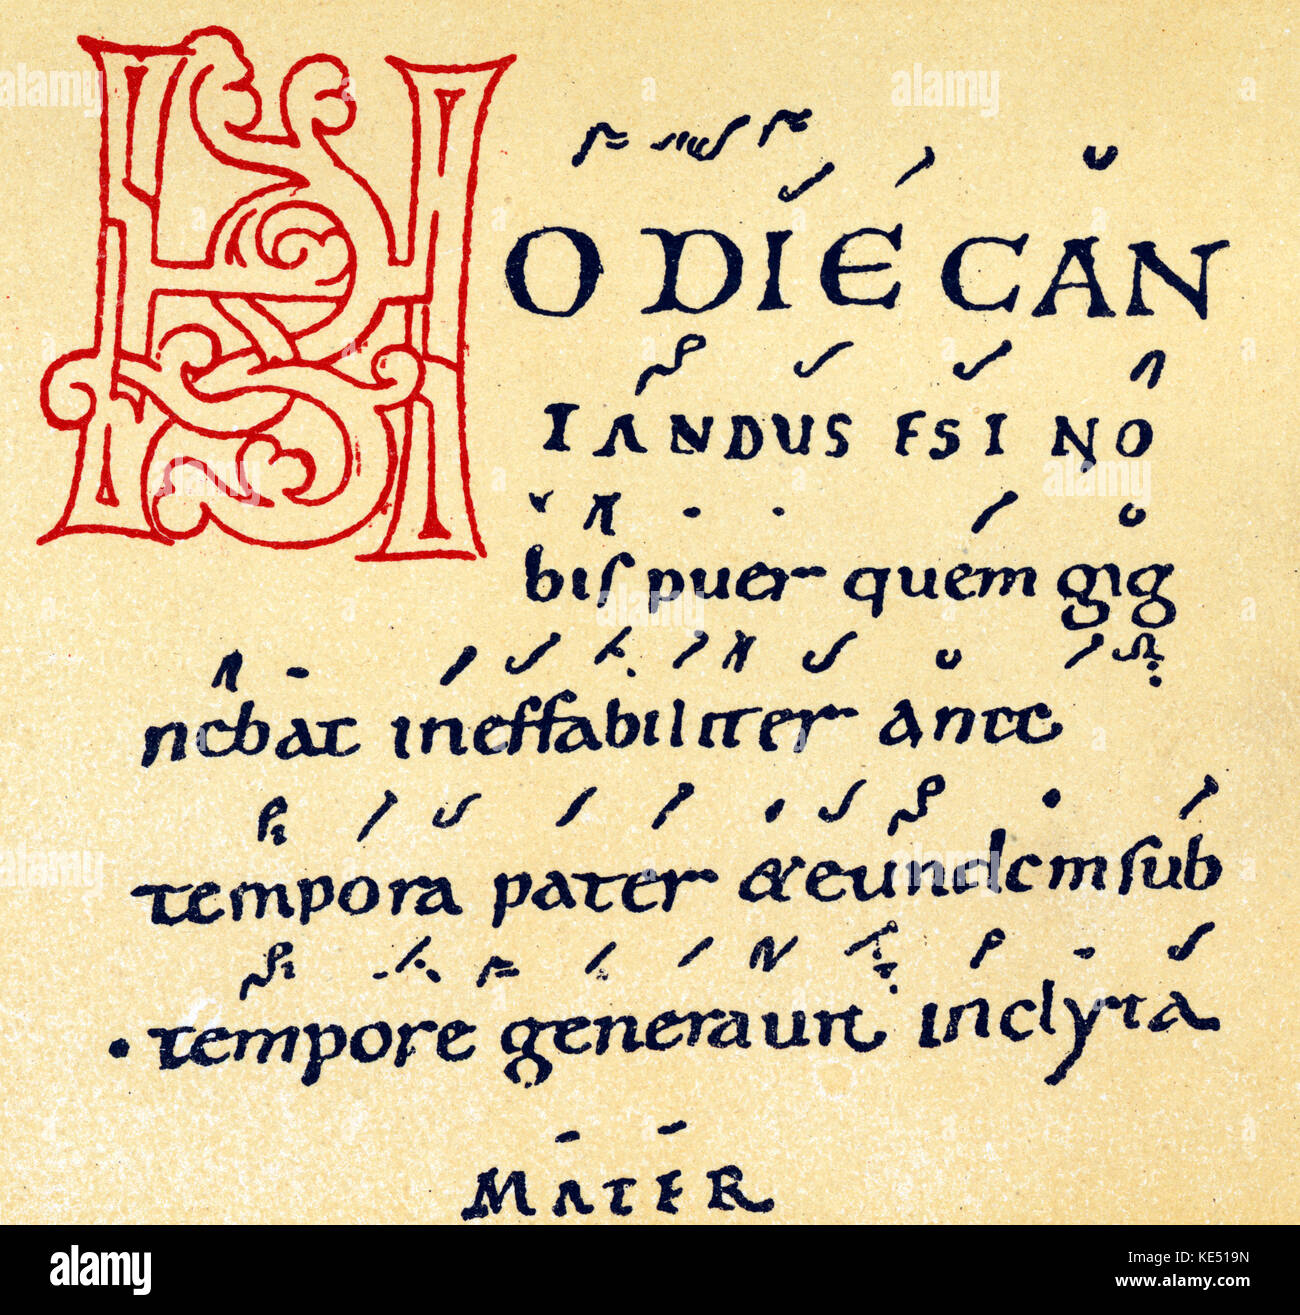 Tropus Tutilo ( or Tuotilo or Tutilo of Saint Gall) - first page of score for 'Hodie Cantandus', 10th century. Tutilo, medieval monk and composer: c. 850 - c. 915. Neume. Neumes. Stock Photo